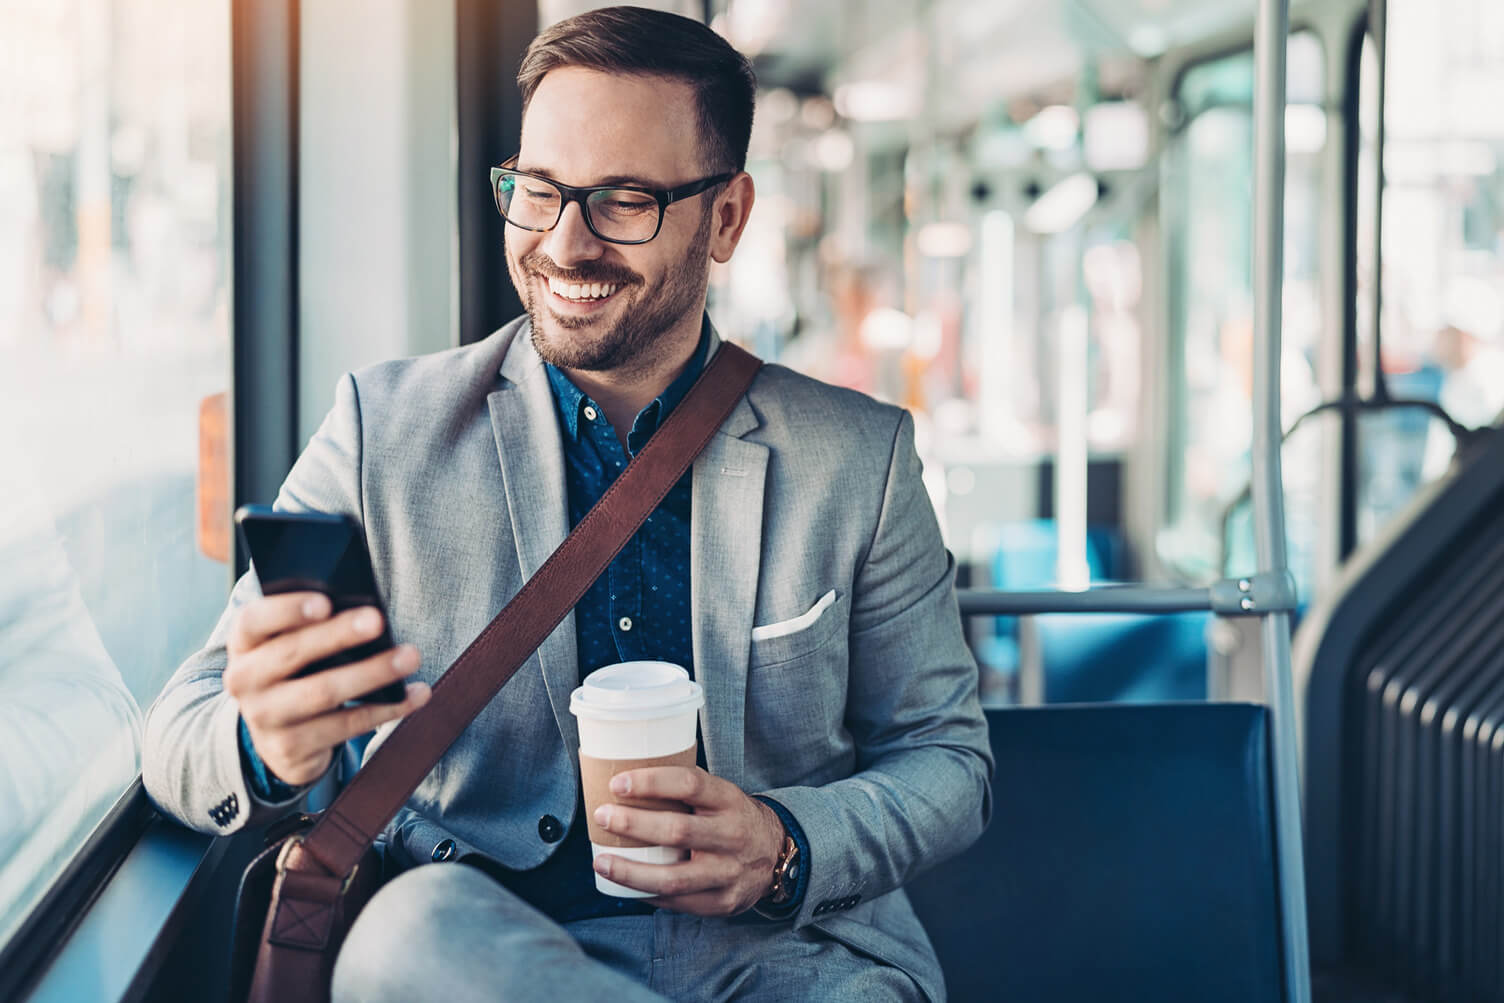 Man smiling while looking his phone on a bus